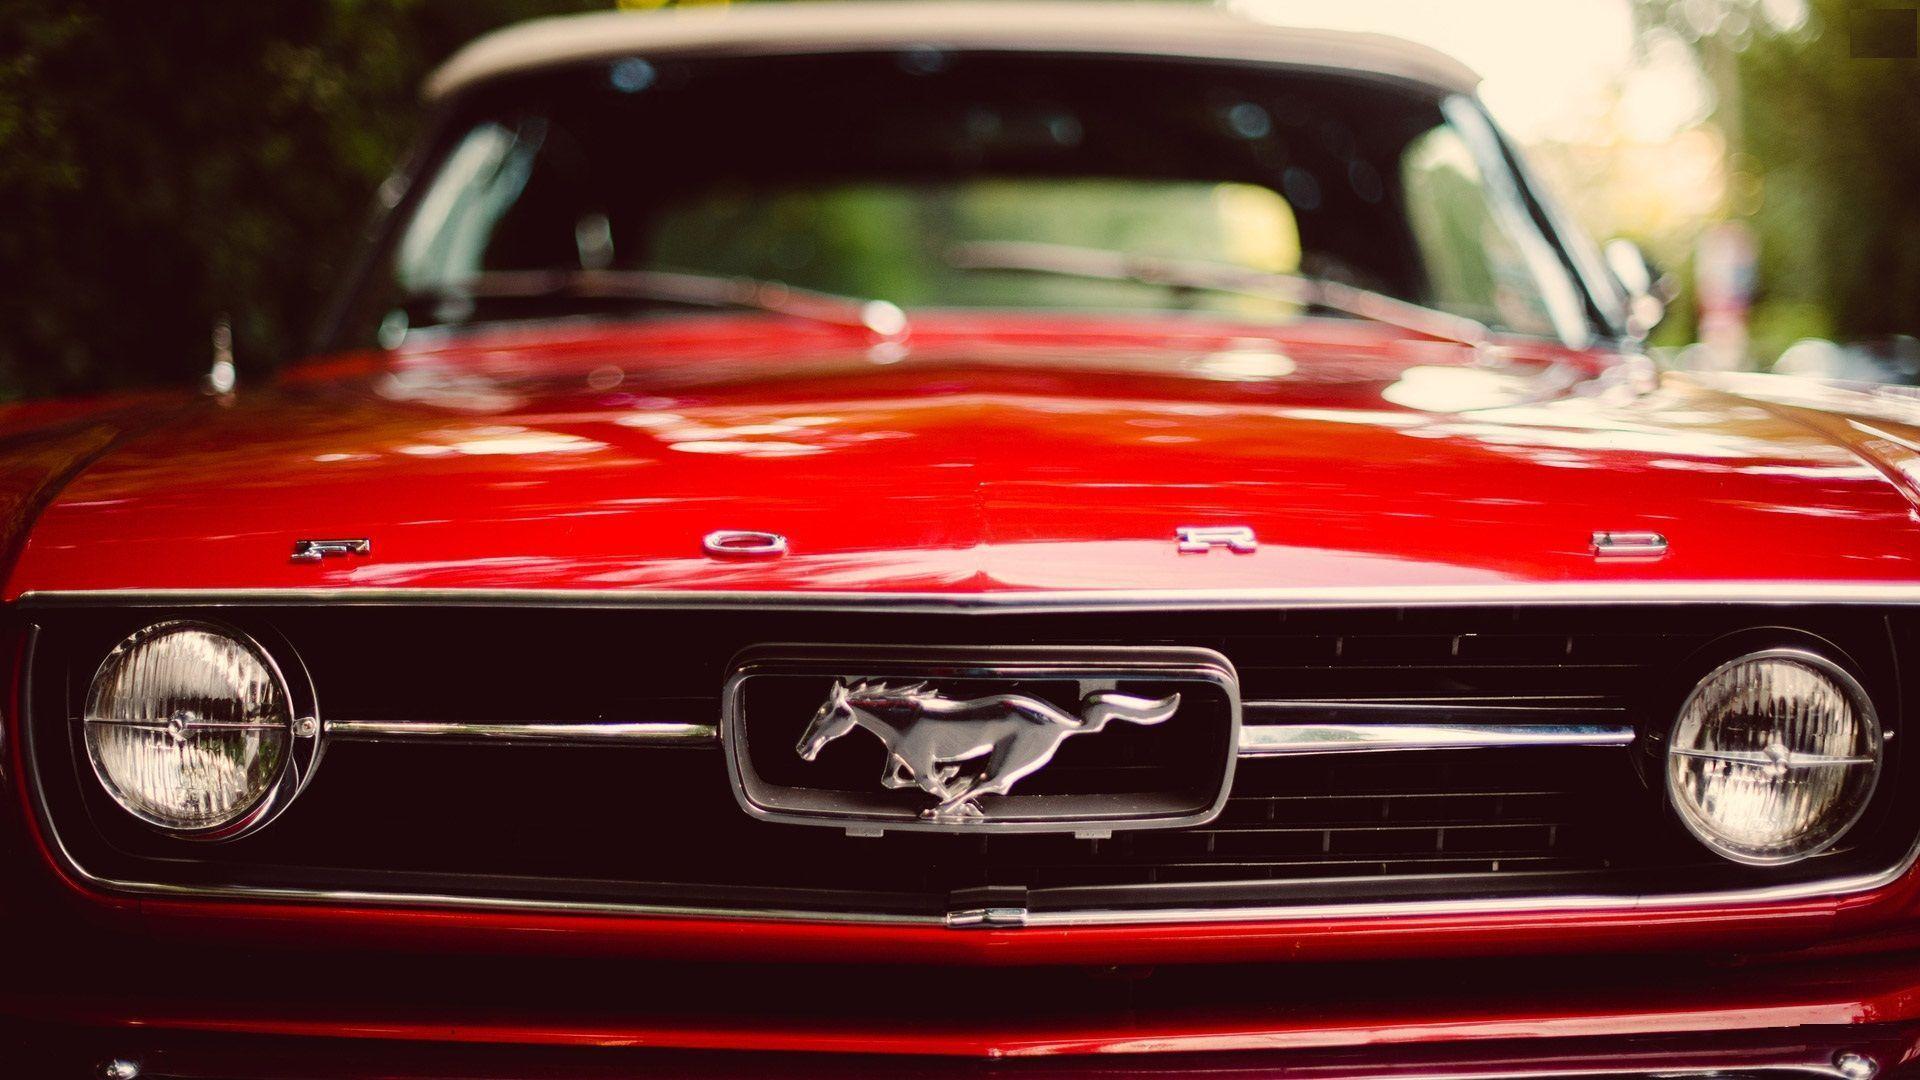 Elegant Red Classic Ford Mustang With Logo Wal. Wallpaper. Basic